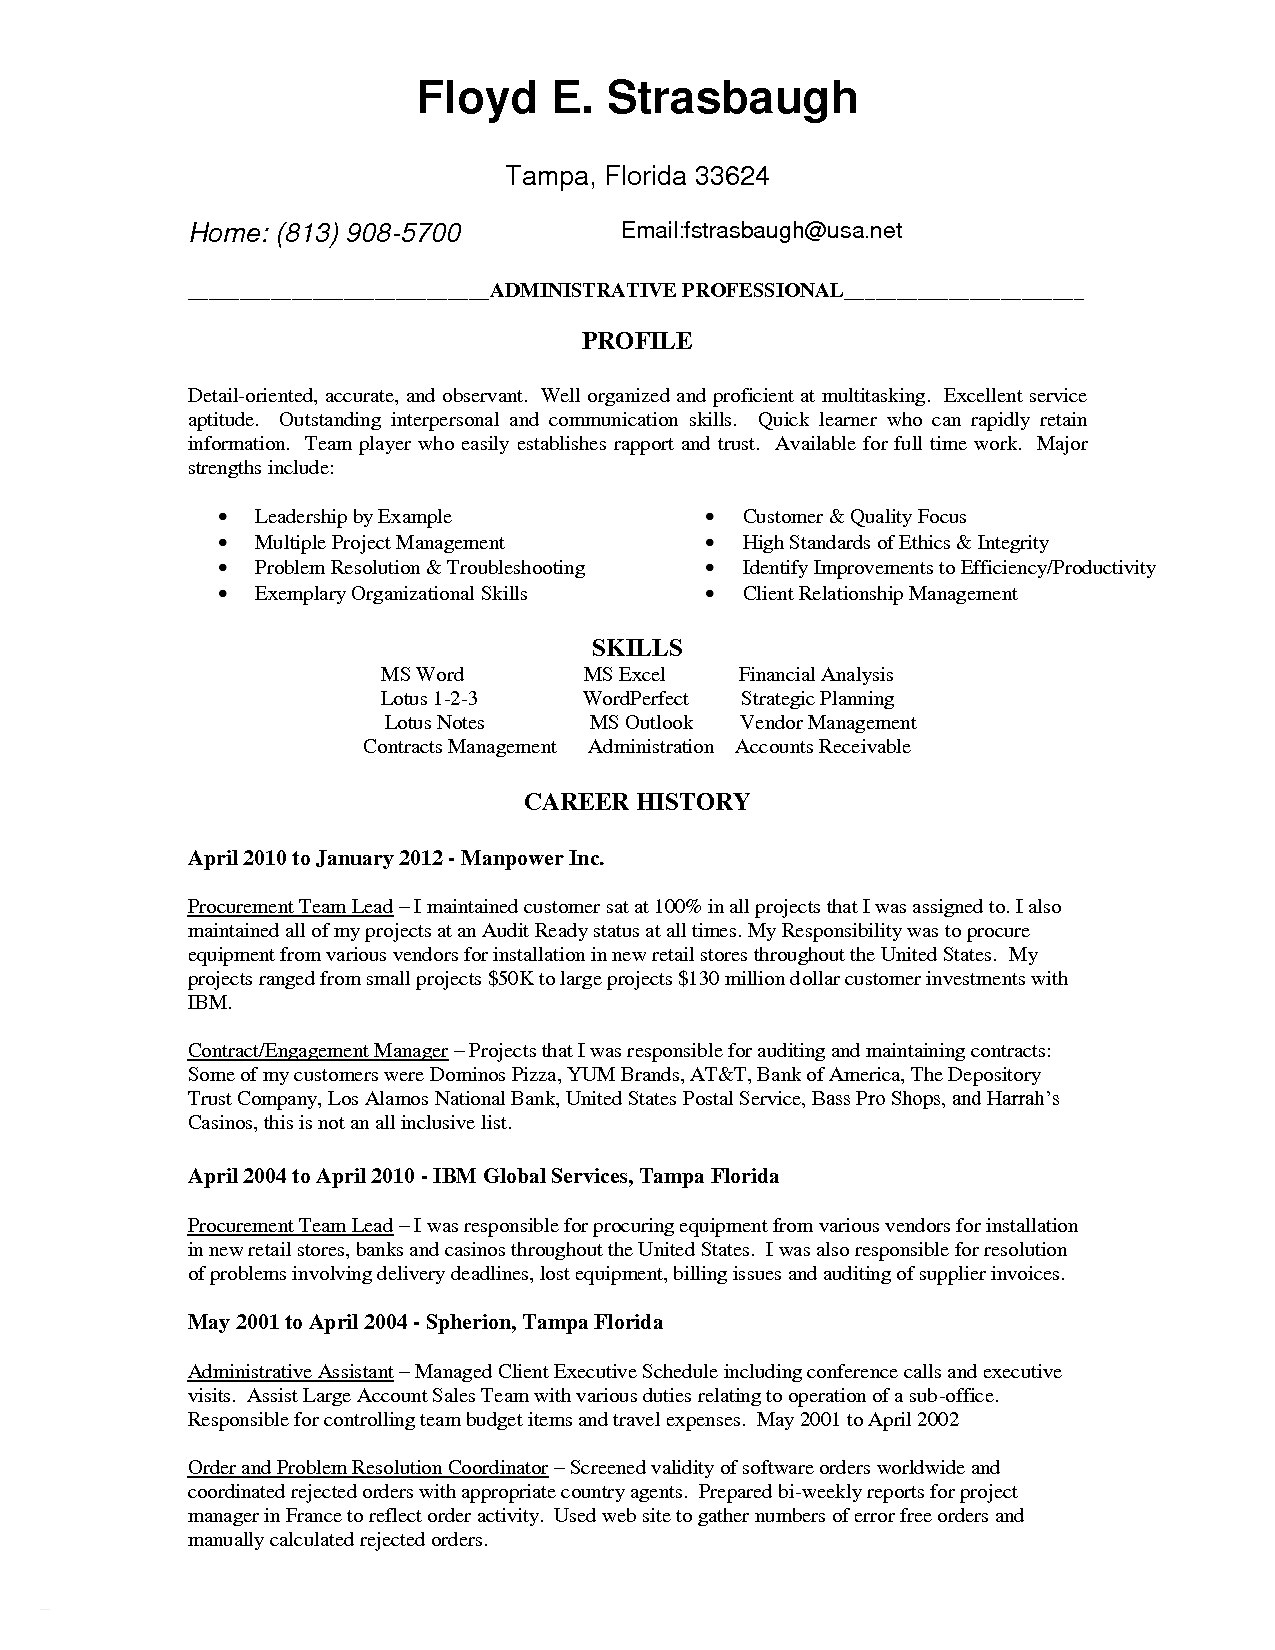 Cover Letter Template - Resume and Cover Letter Templates Free Download Professional Resume